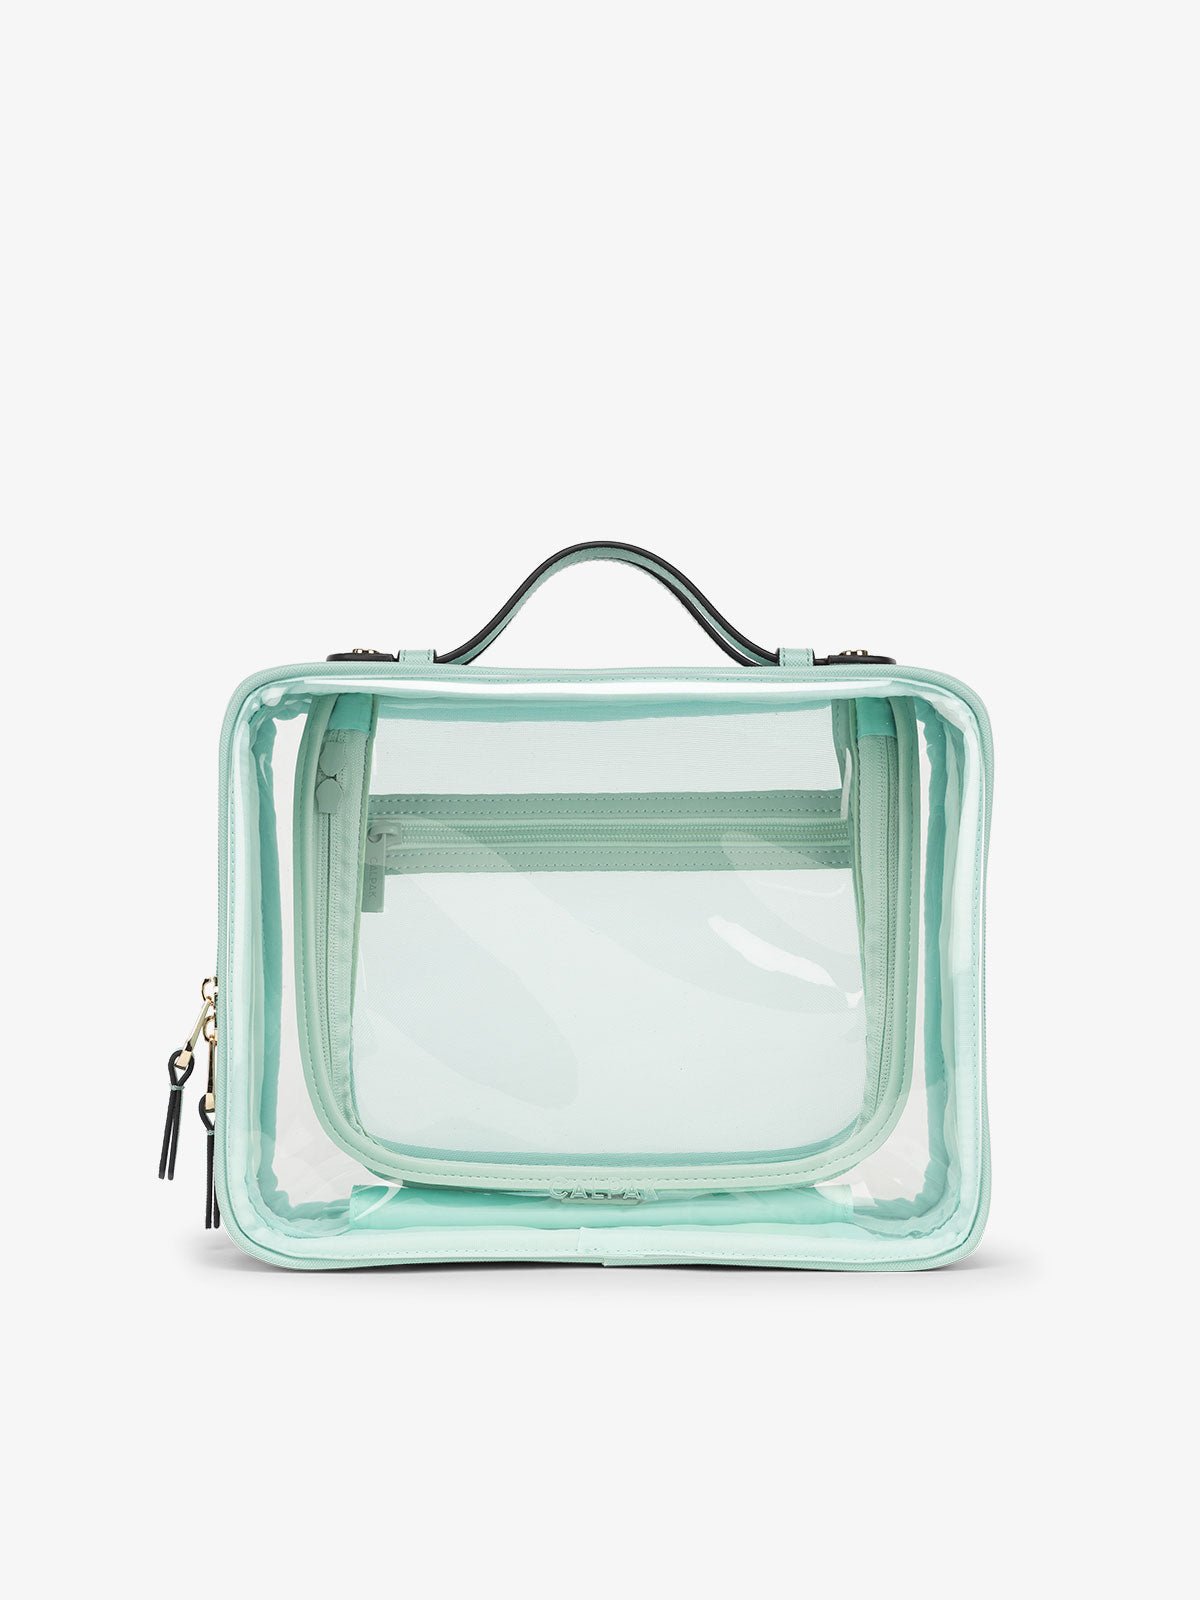 CALPAK Large clear makeup bag with dual handles and zippered compartments in aqua